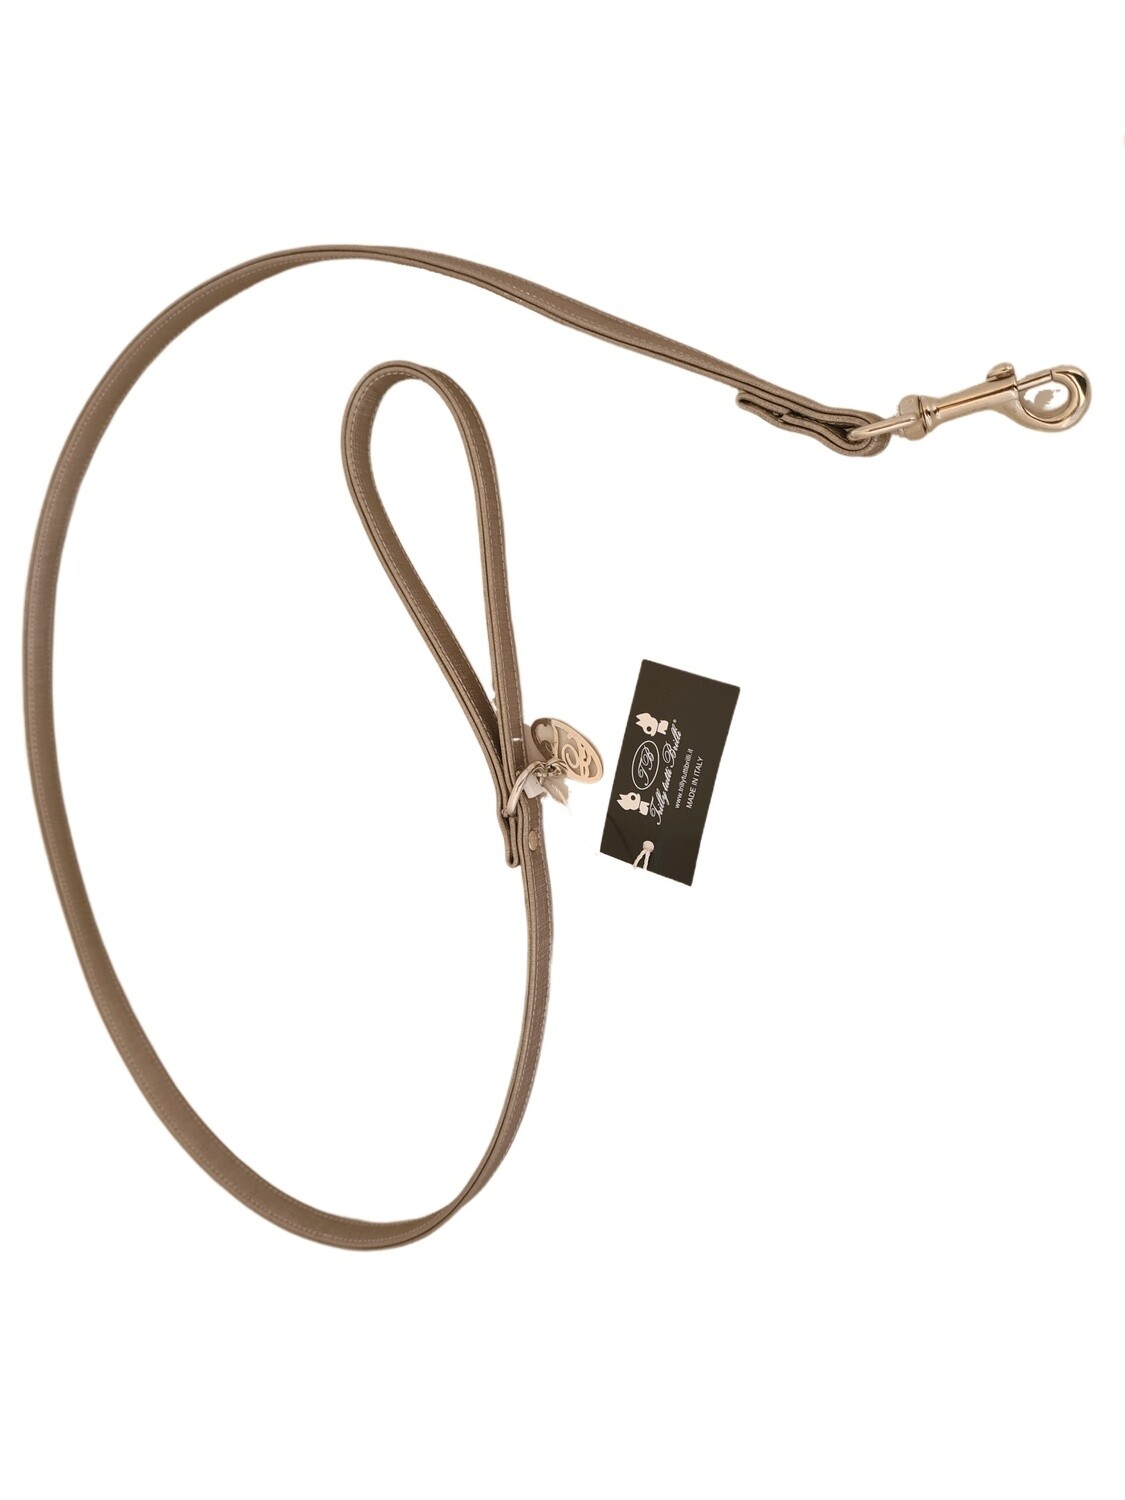 Lione Leash Trilly 29 Lead in relief - Stock